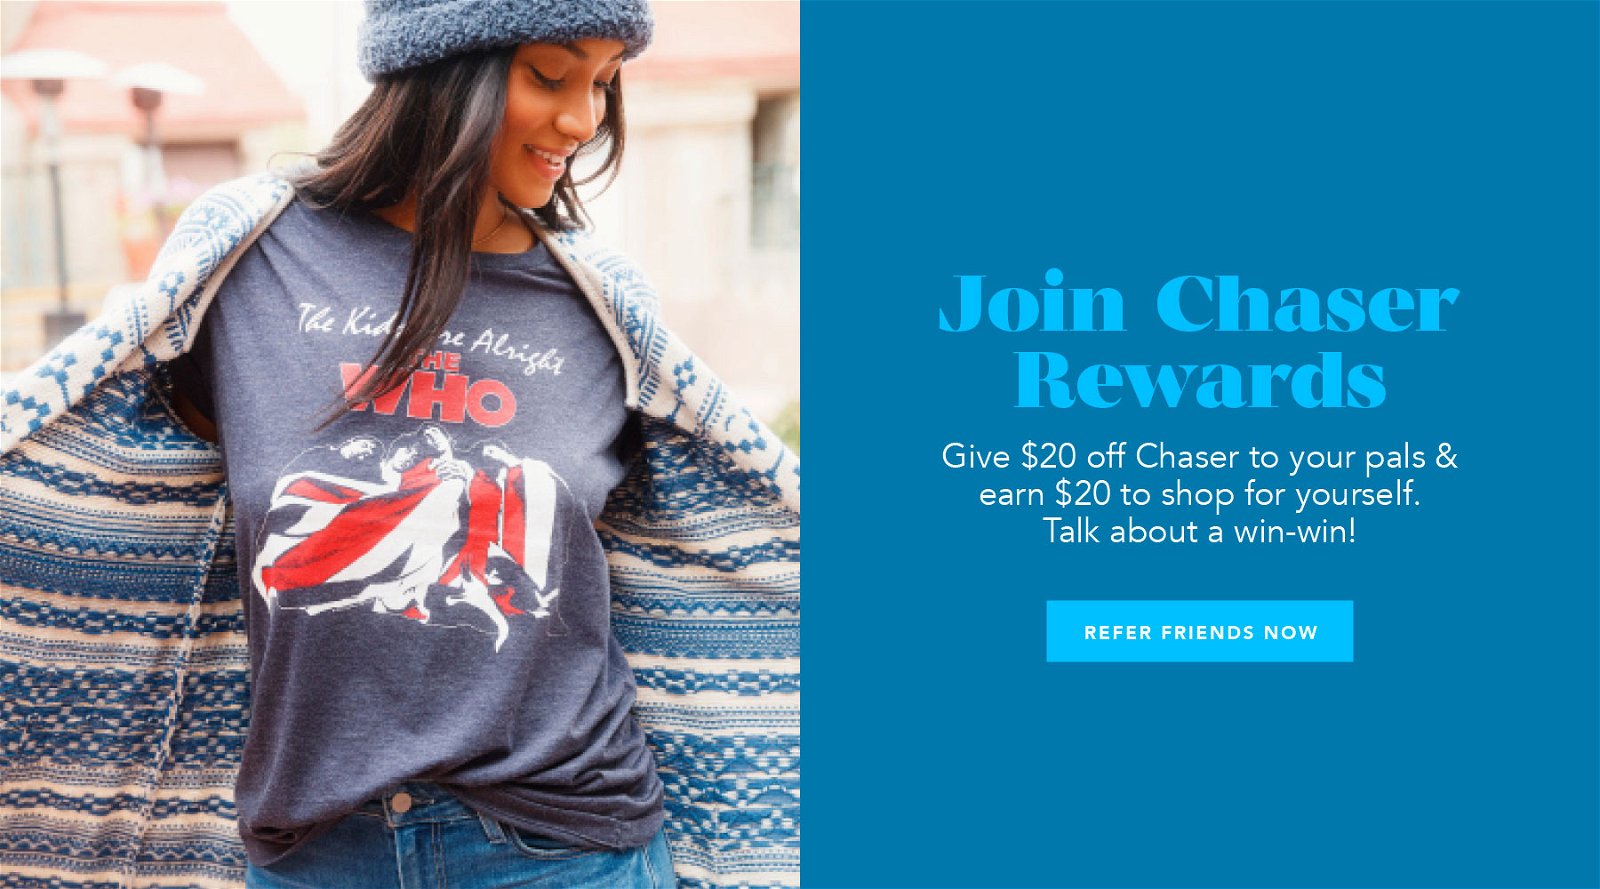 Let' take this relationship to the next level - join Chaser Rewards!